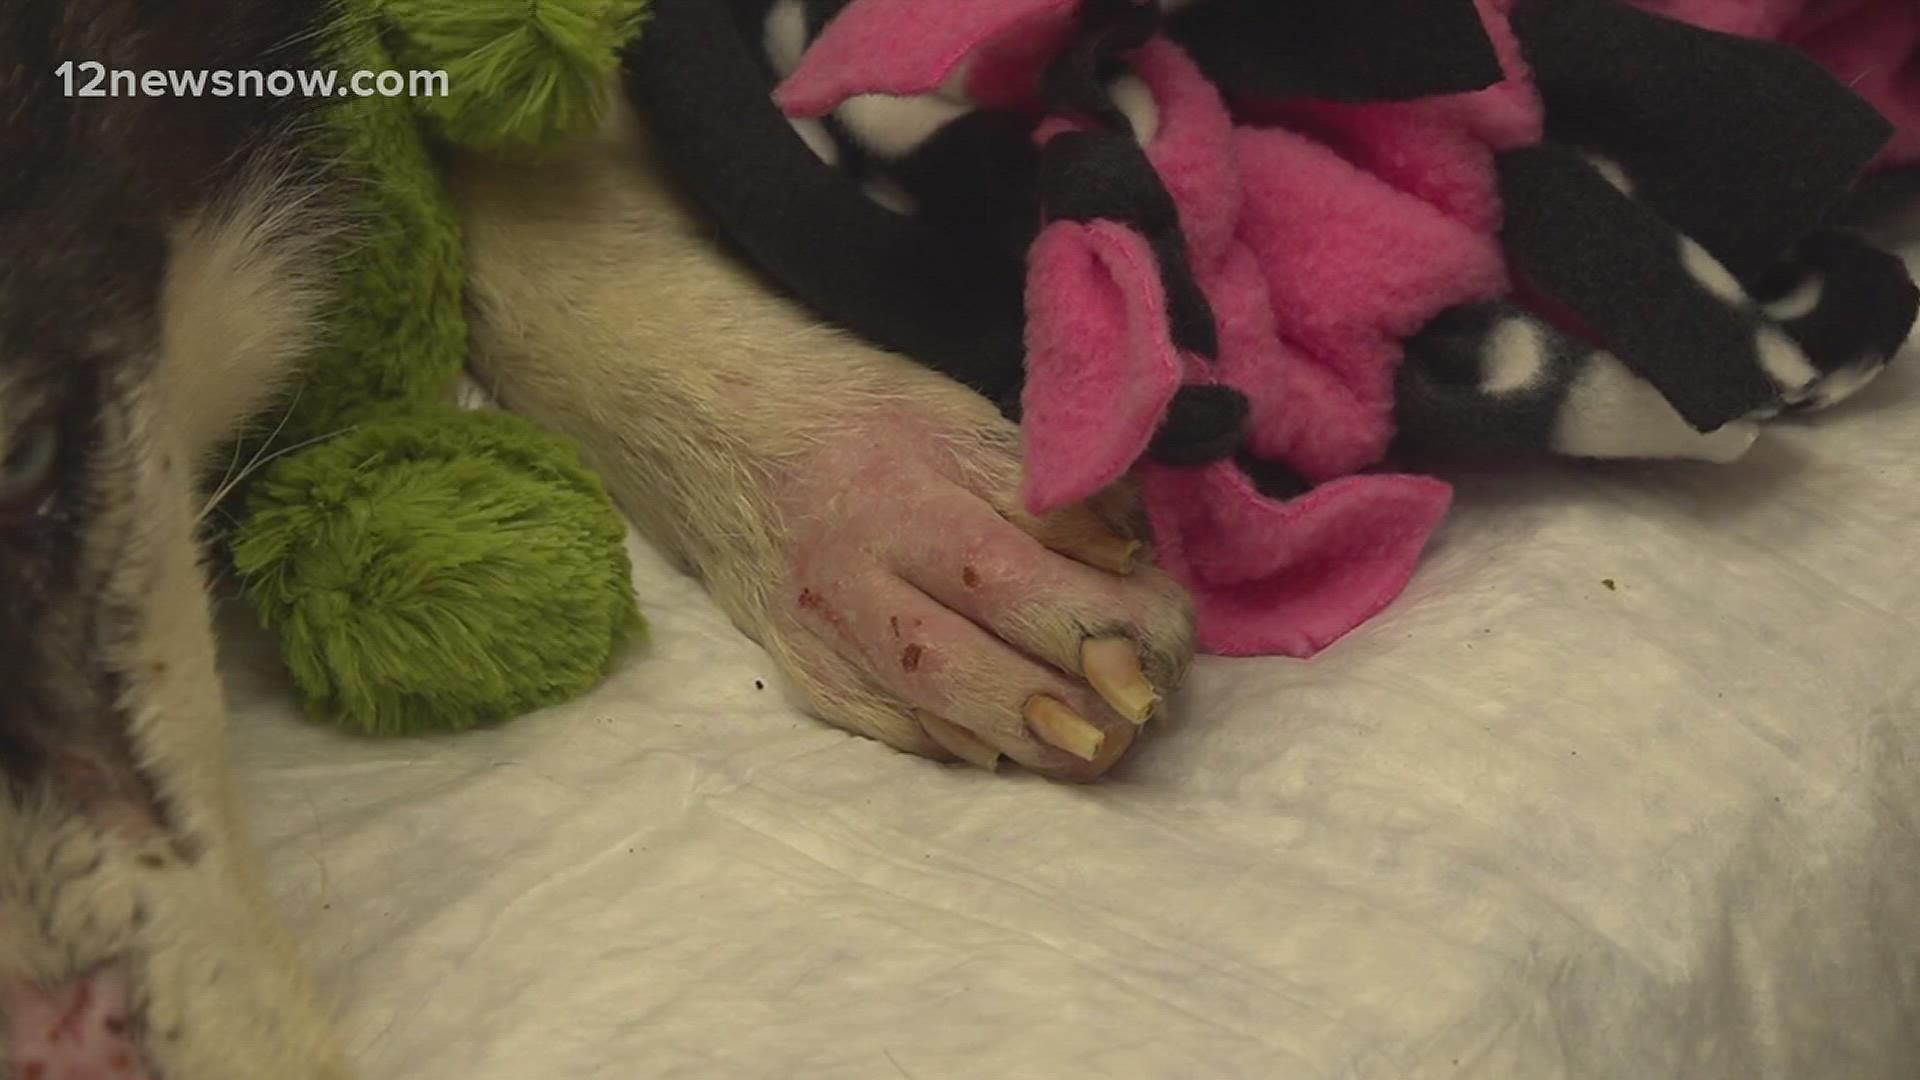 Female dog 'Yodda' recovering after extensive abuse 